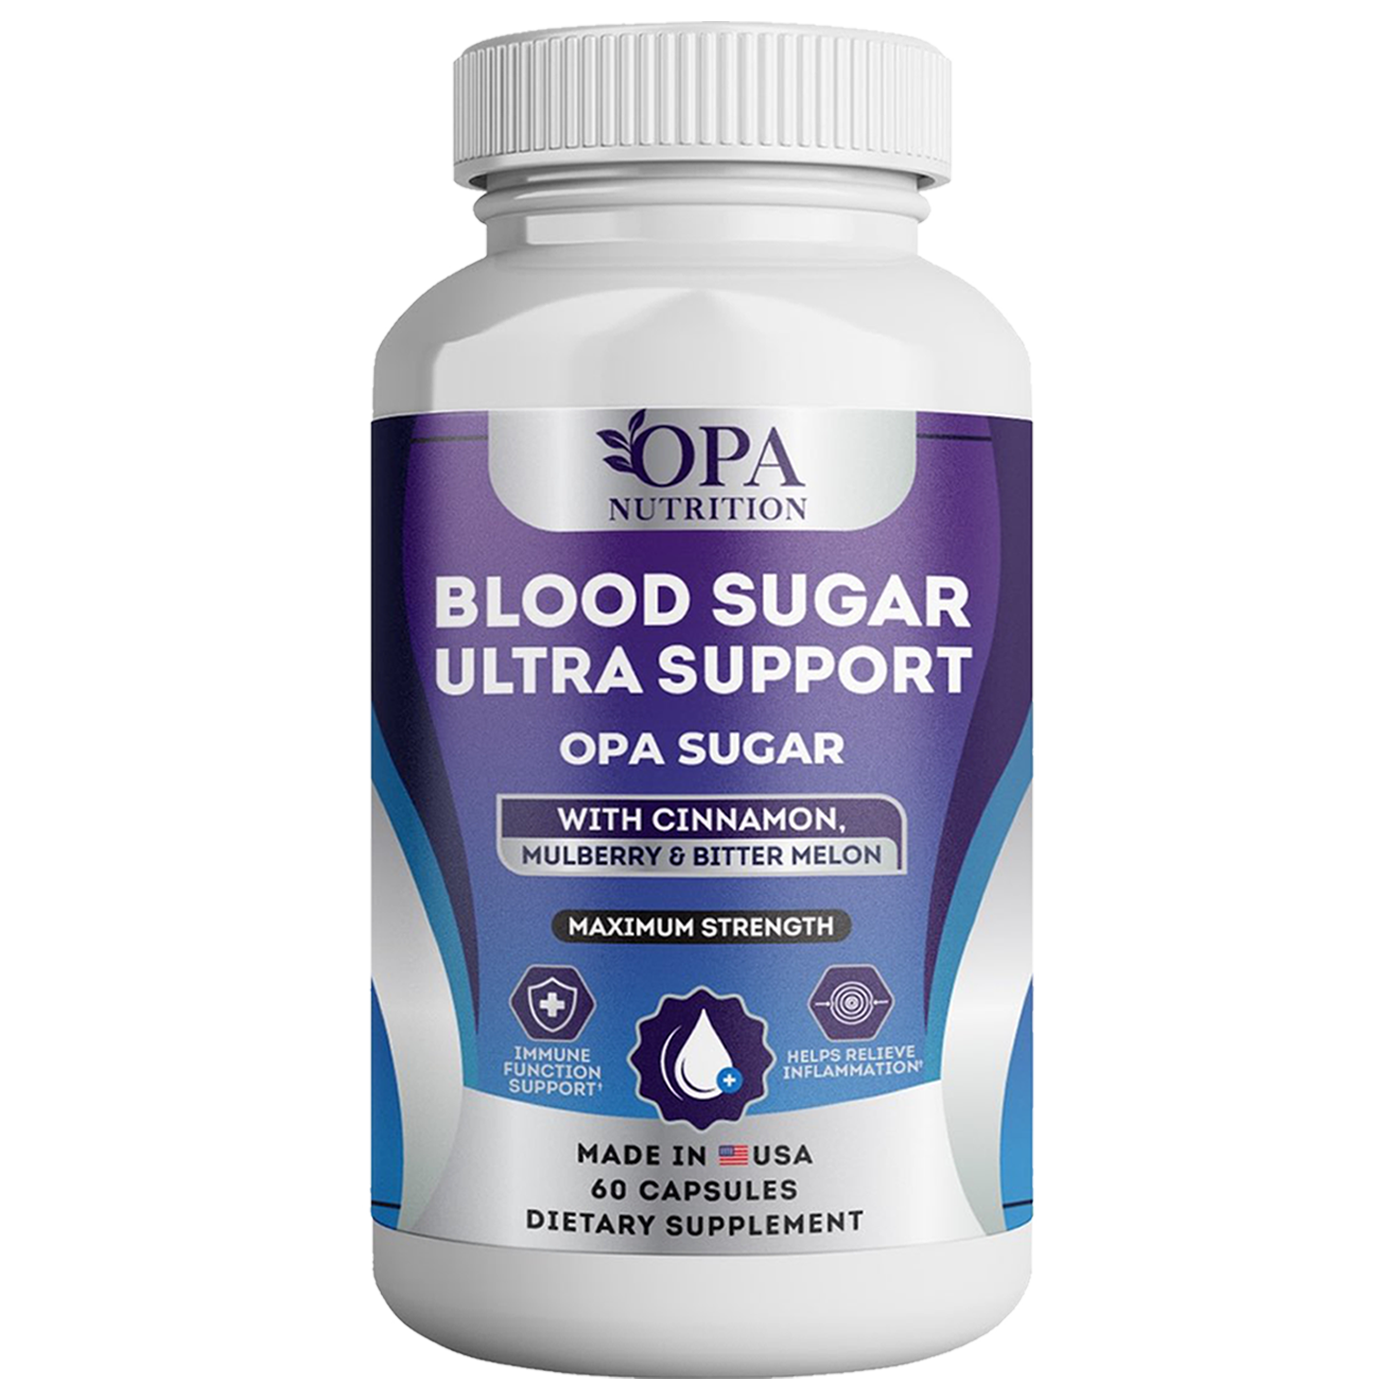 Blood Sugar Support Supplement with Bitter Melon & Cinnamon - 60 Ct. front ingredients